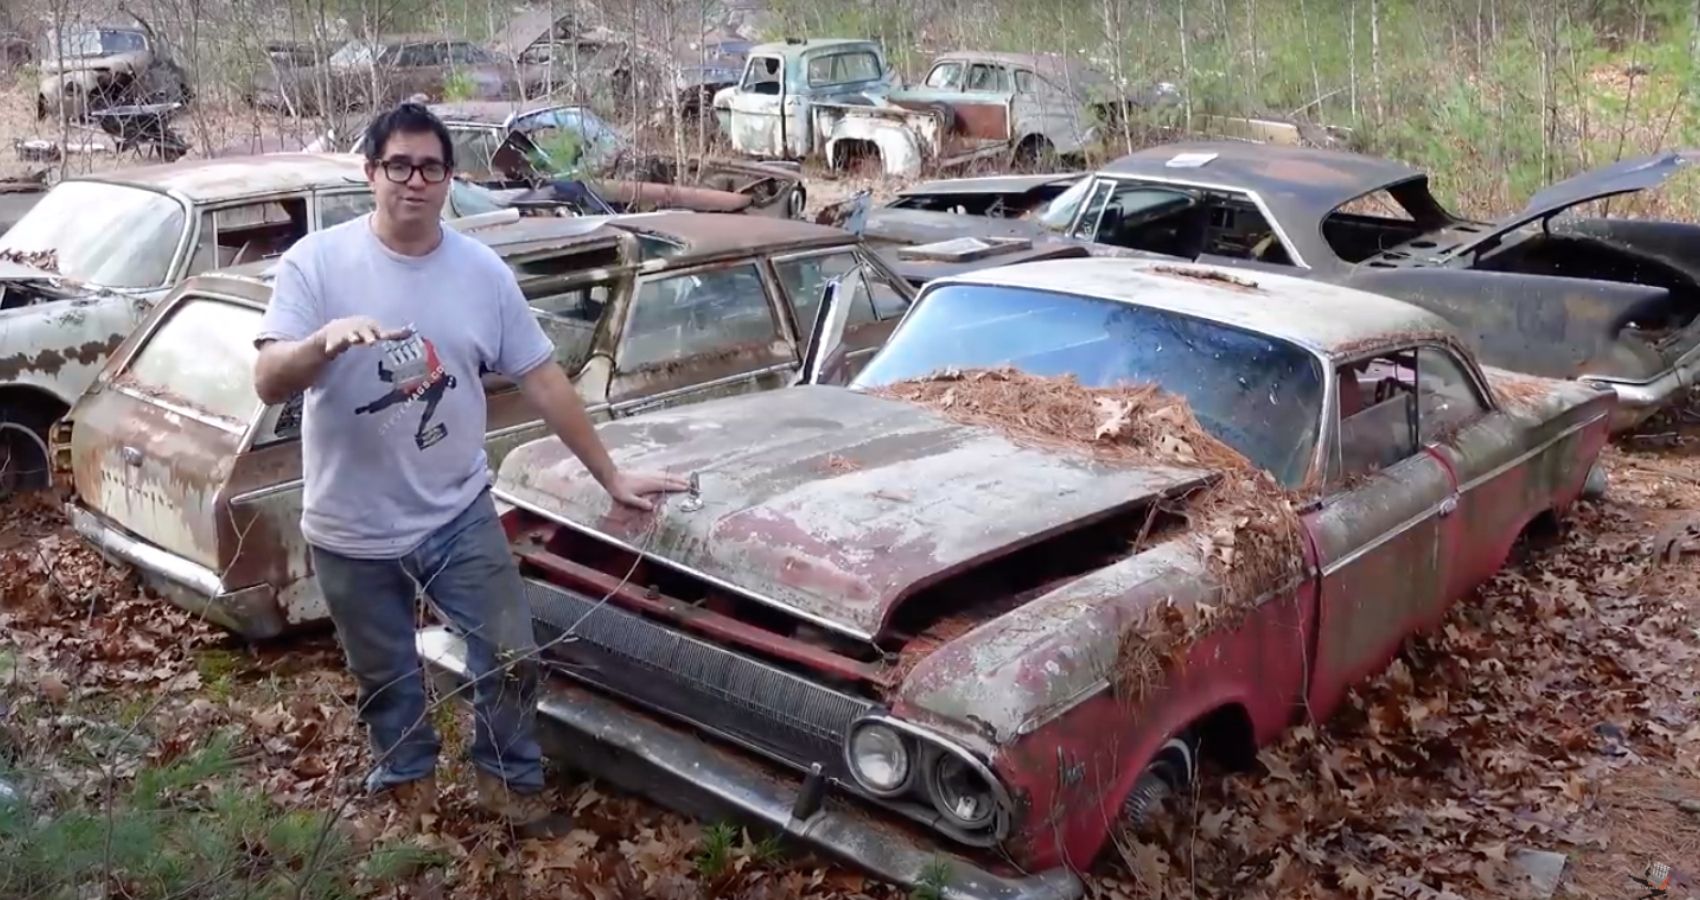 Steve Magnante Reveals A Surprise From This Rare 1963 Dodge Custom 880 Hardtop